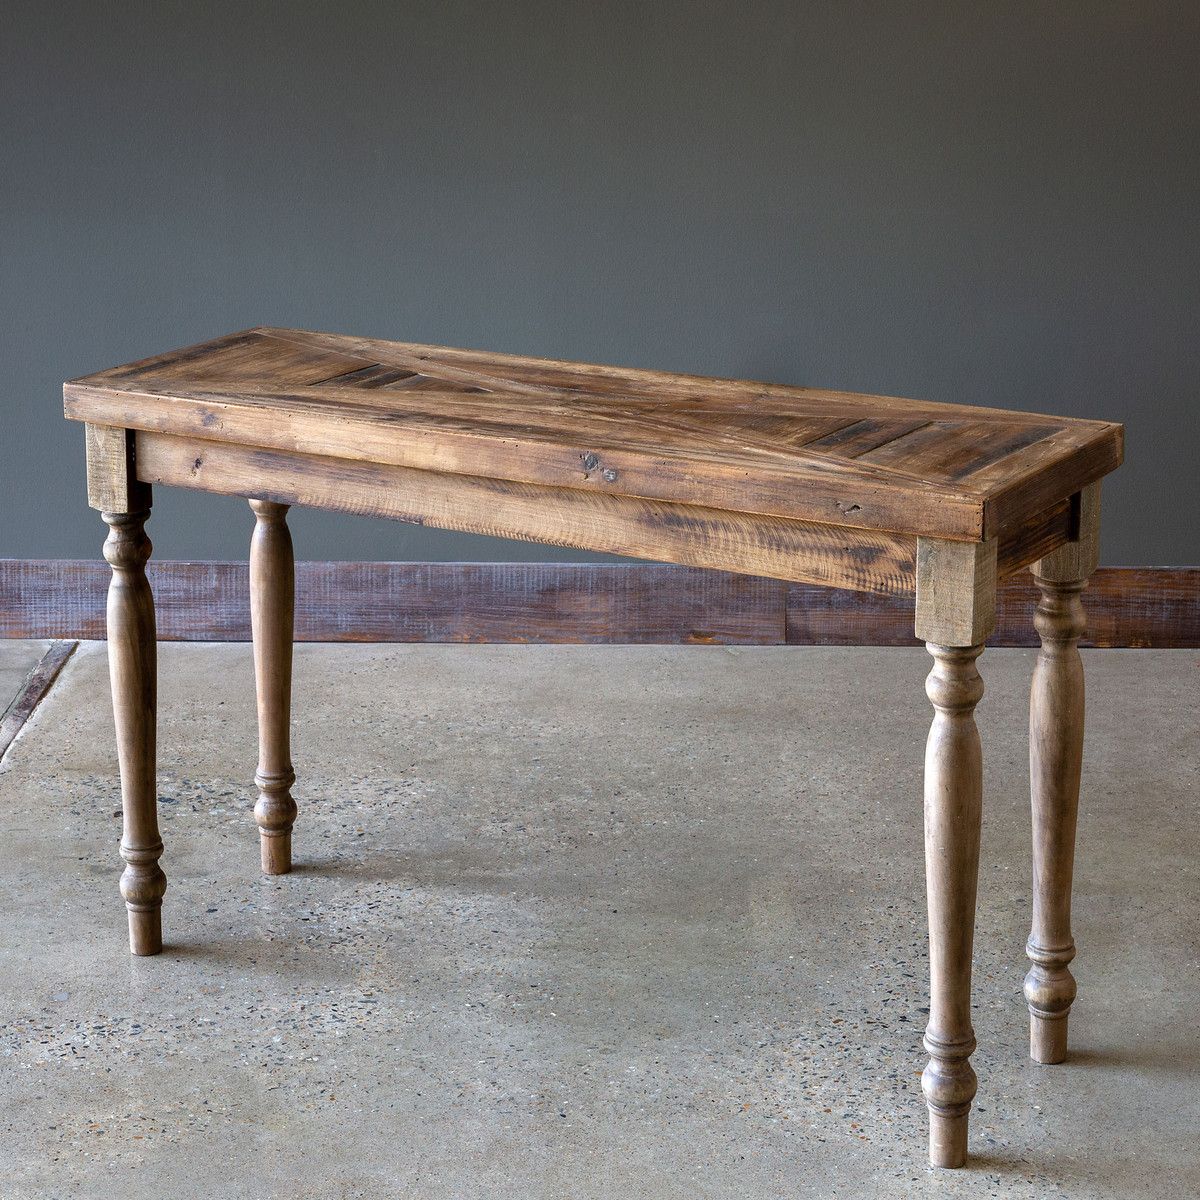 Park Hill Collections Efc00950 Reclaimed Wood Fixture In Smoked Barnwood Console Tables (View 3 of 20)